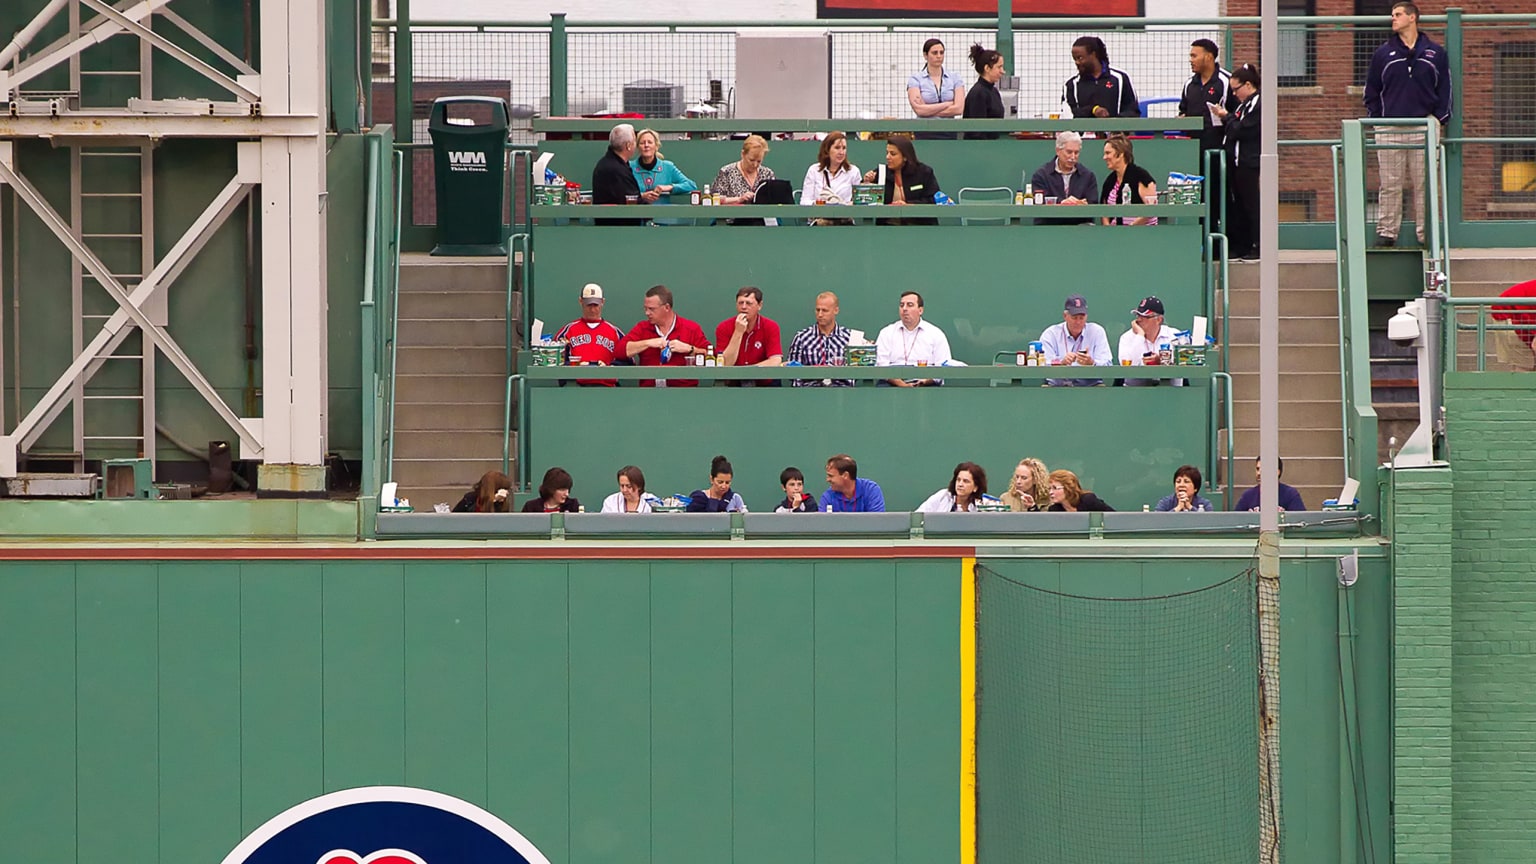 Red Sox to use 'dynamic pricing' on Green Monster seats - The Boston Globe